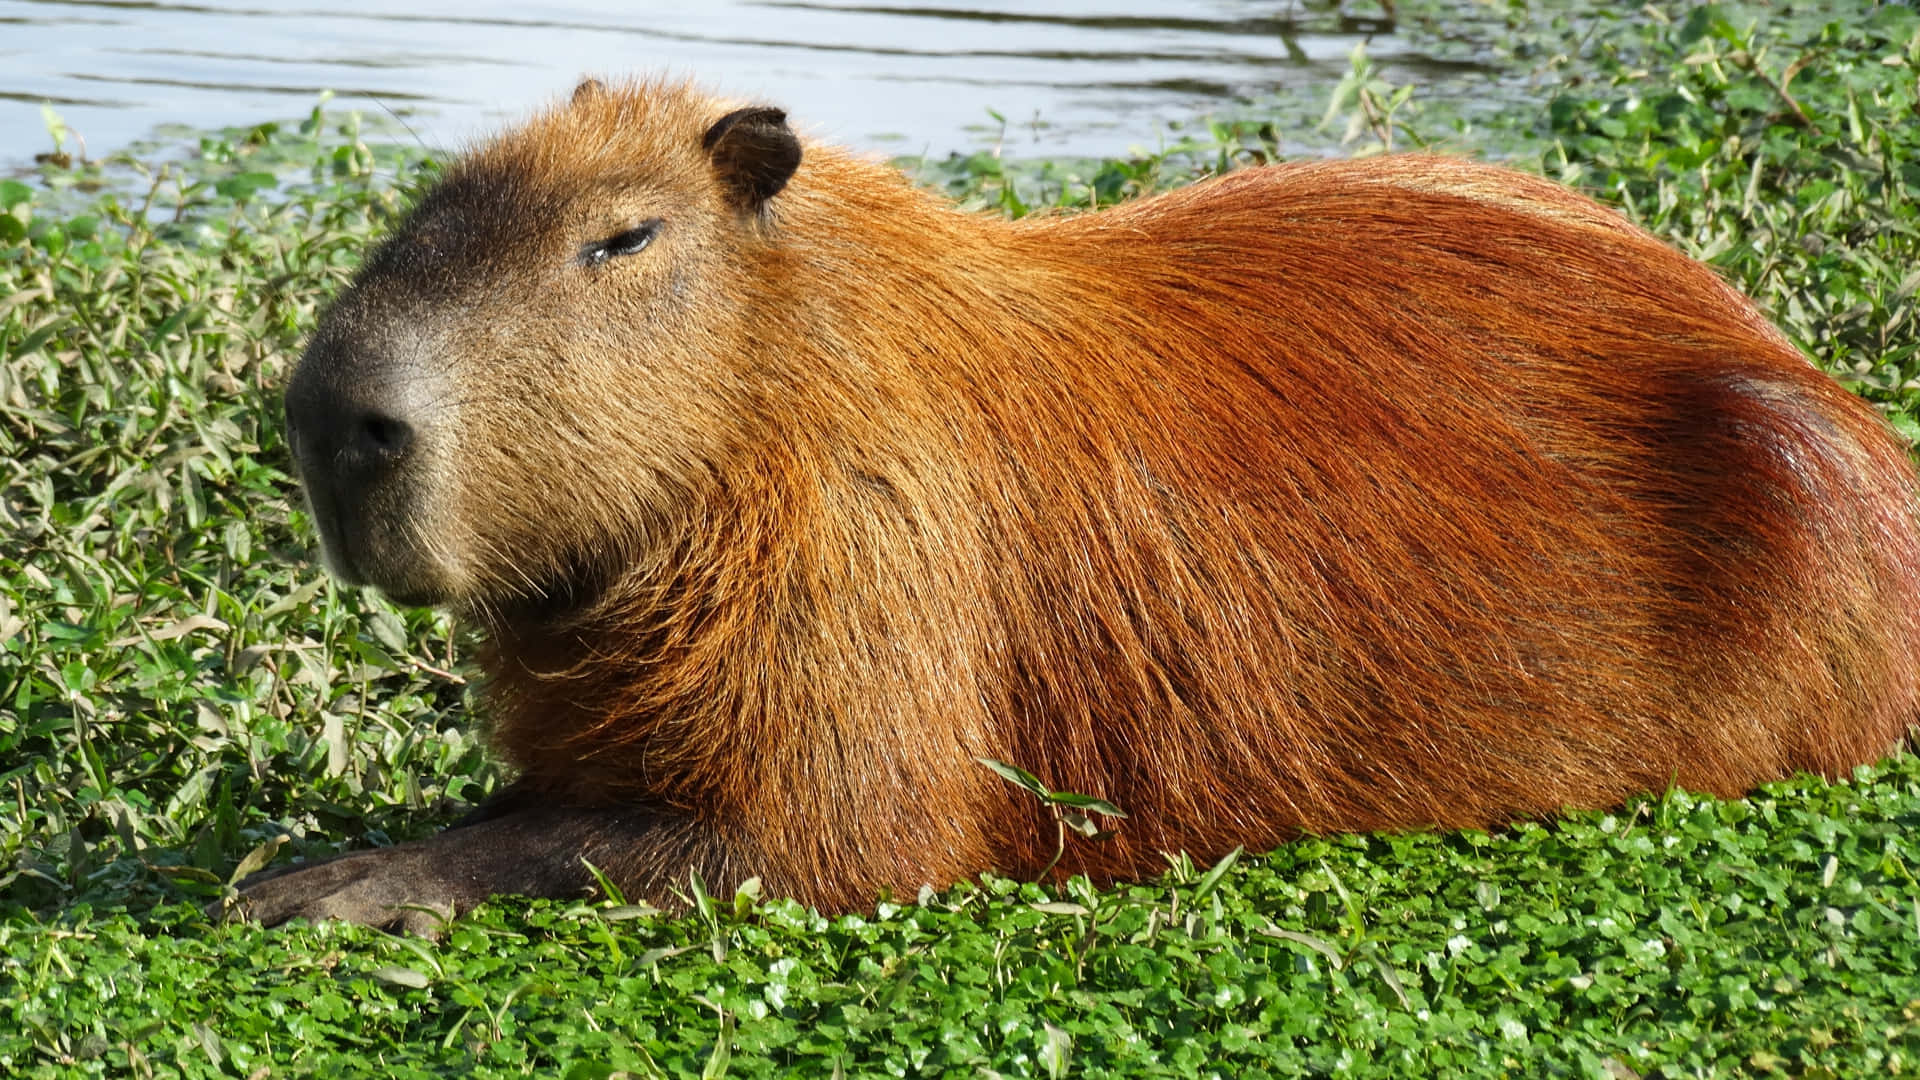 A family of capybaras taking a dip in a river together.